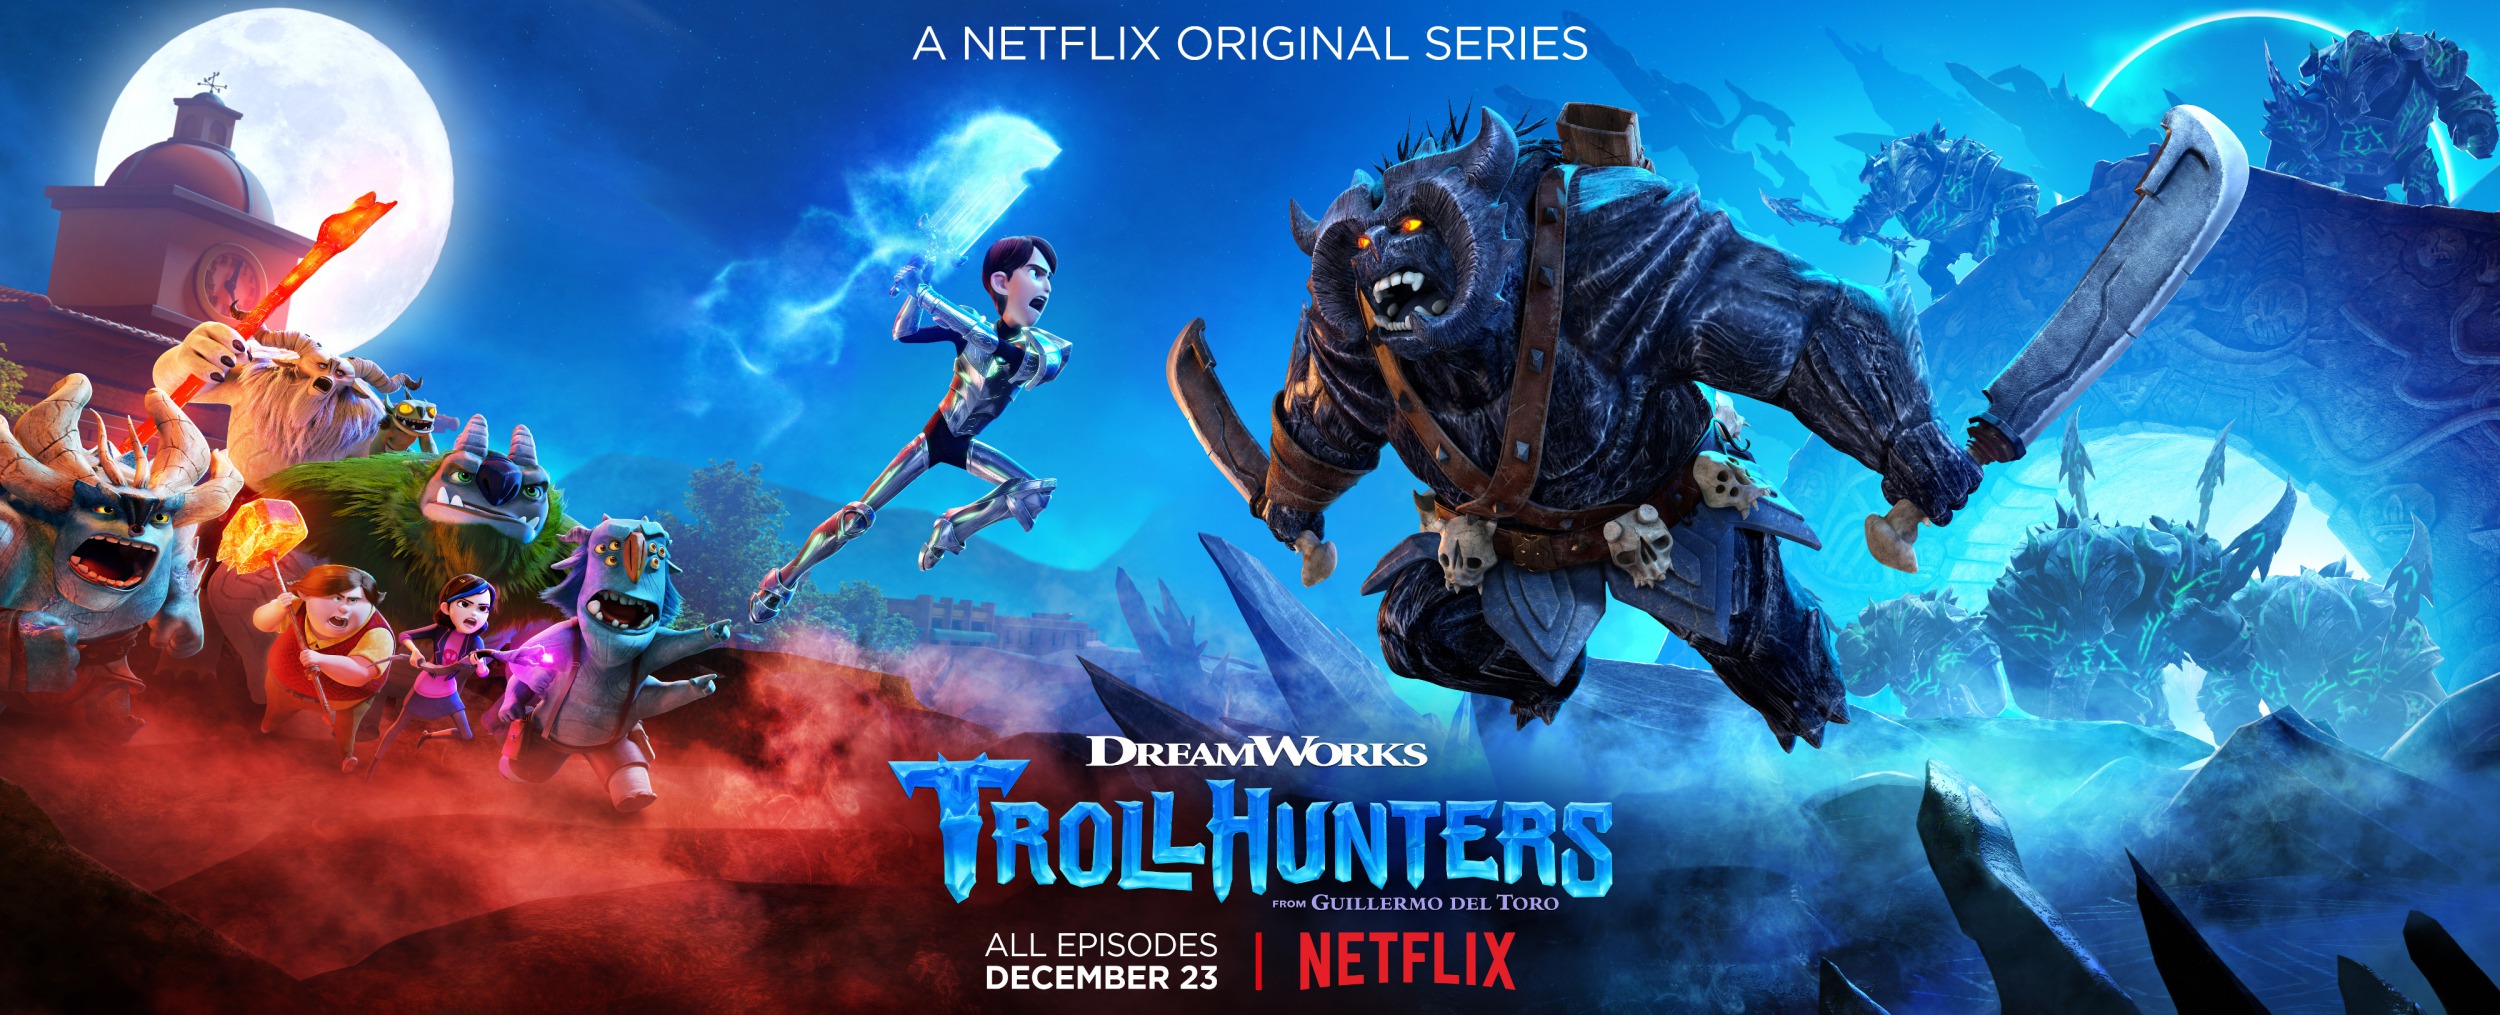 Mega Sized TV Poster Image for Trollhunters (#12 of 20)